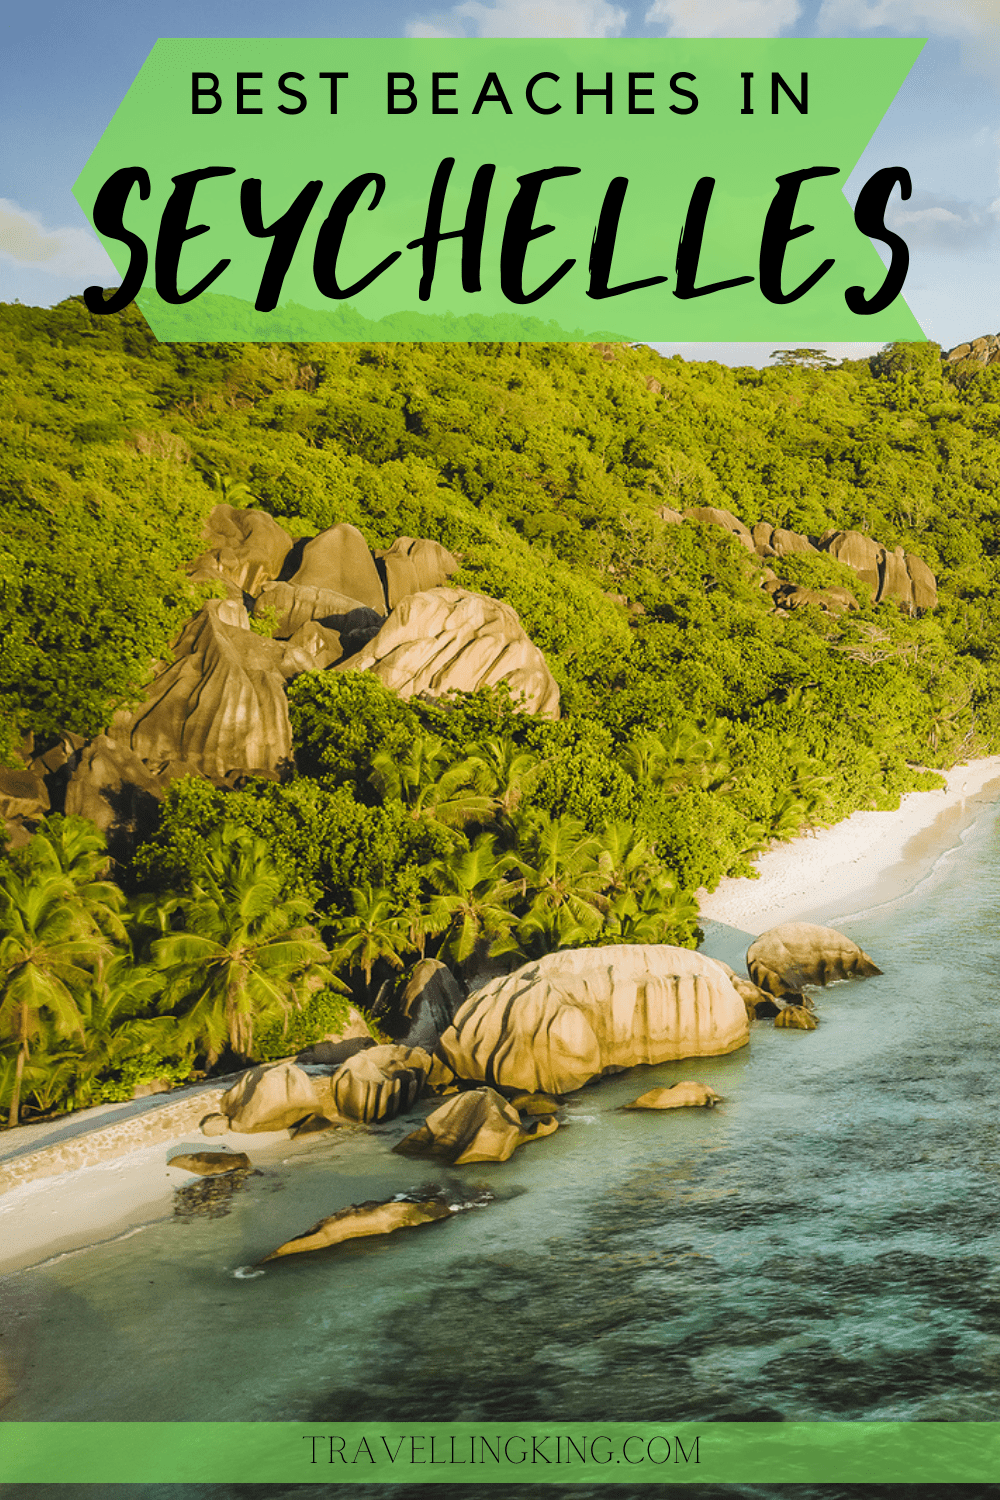 11 of the Best Beaches in Seychelles